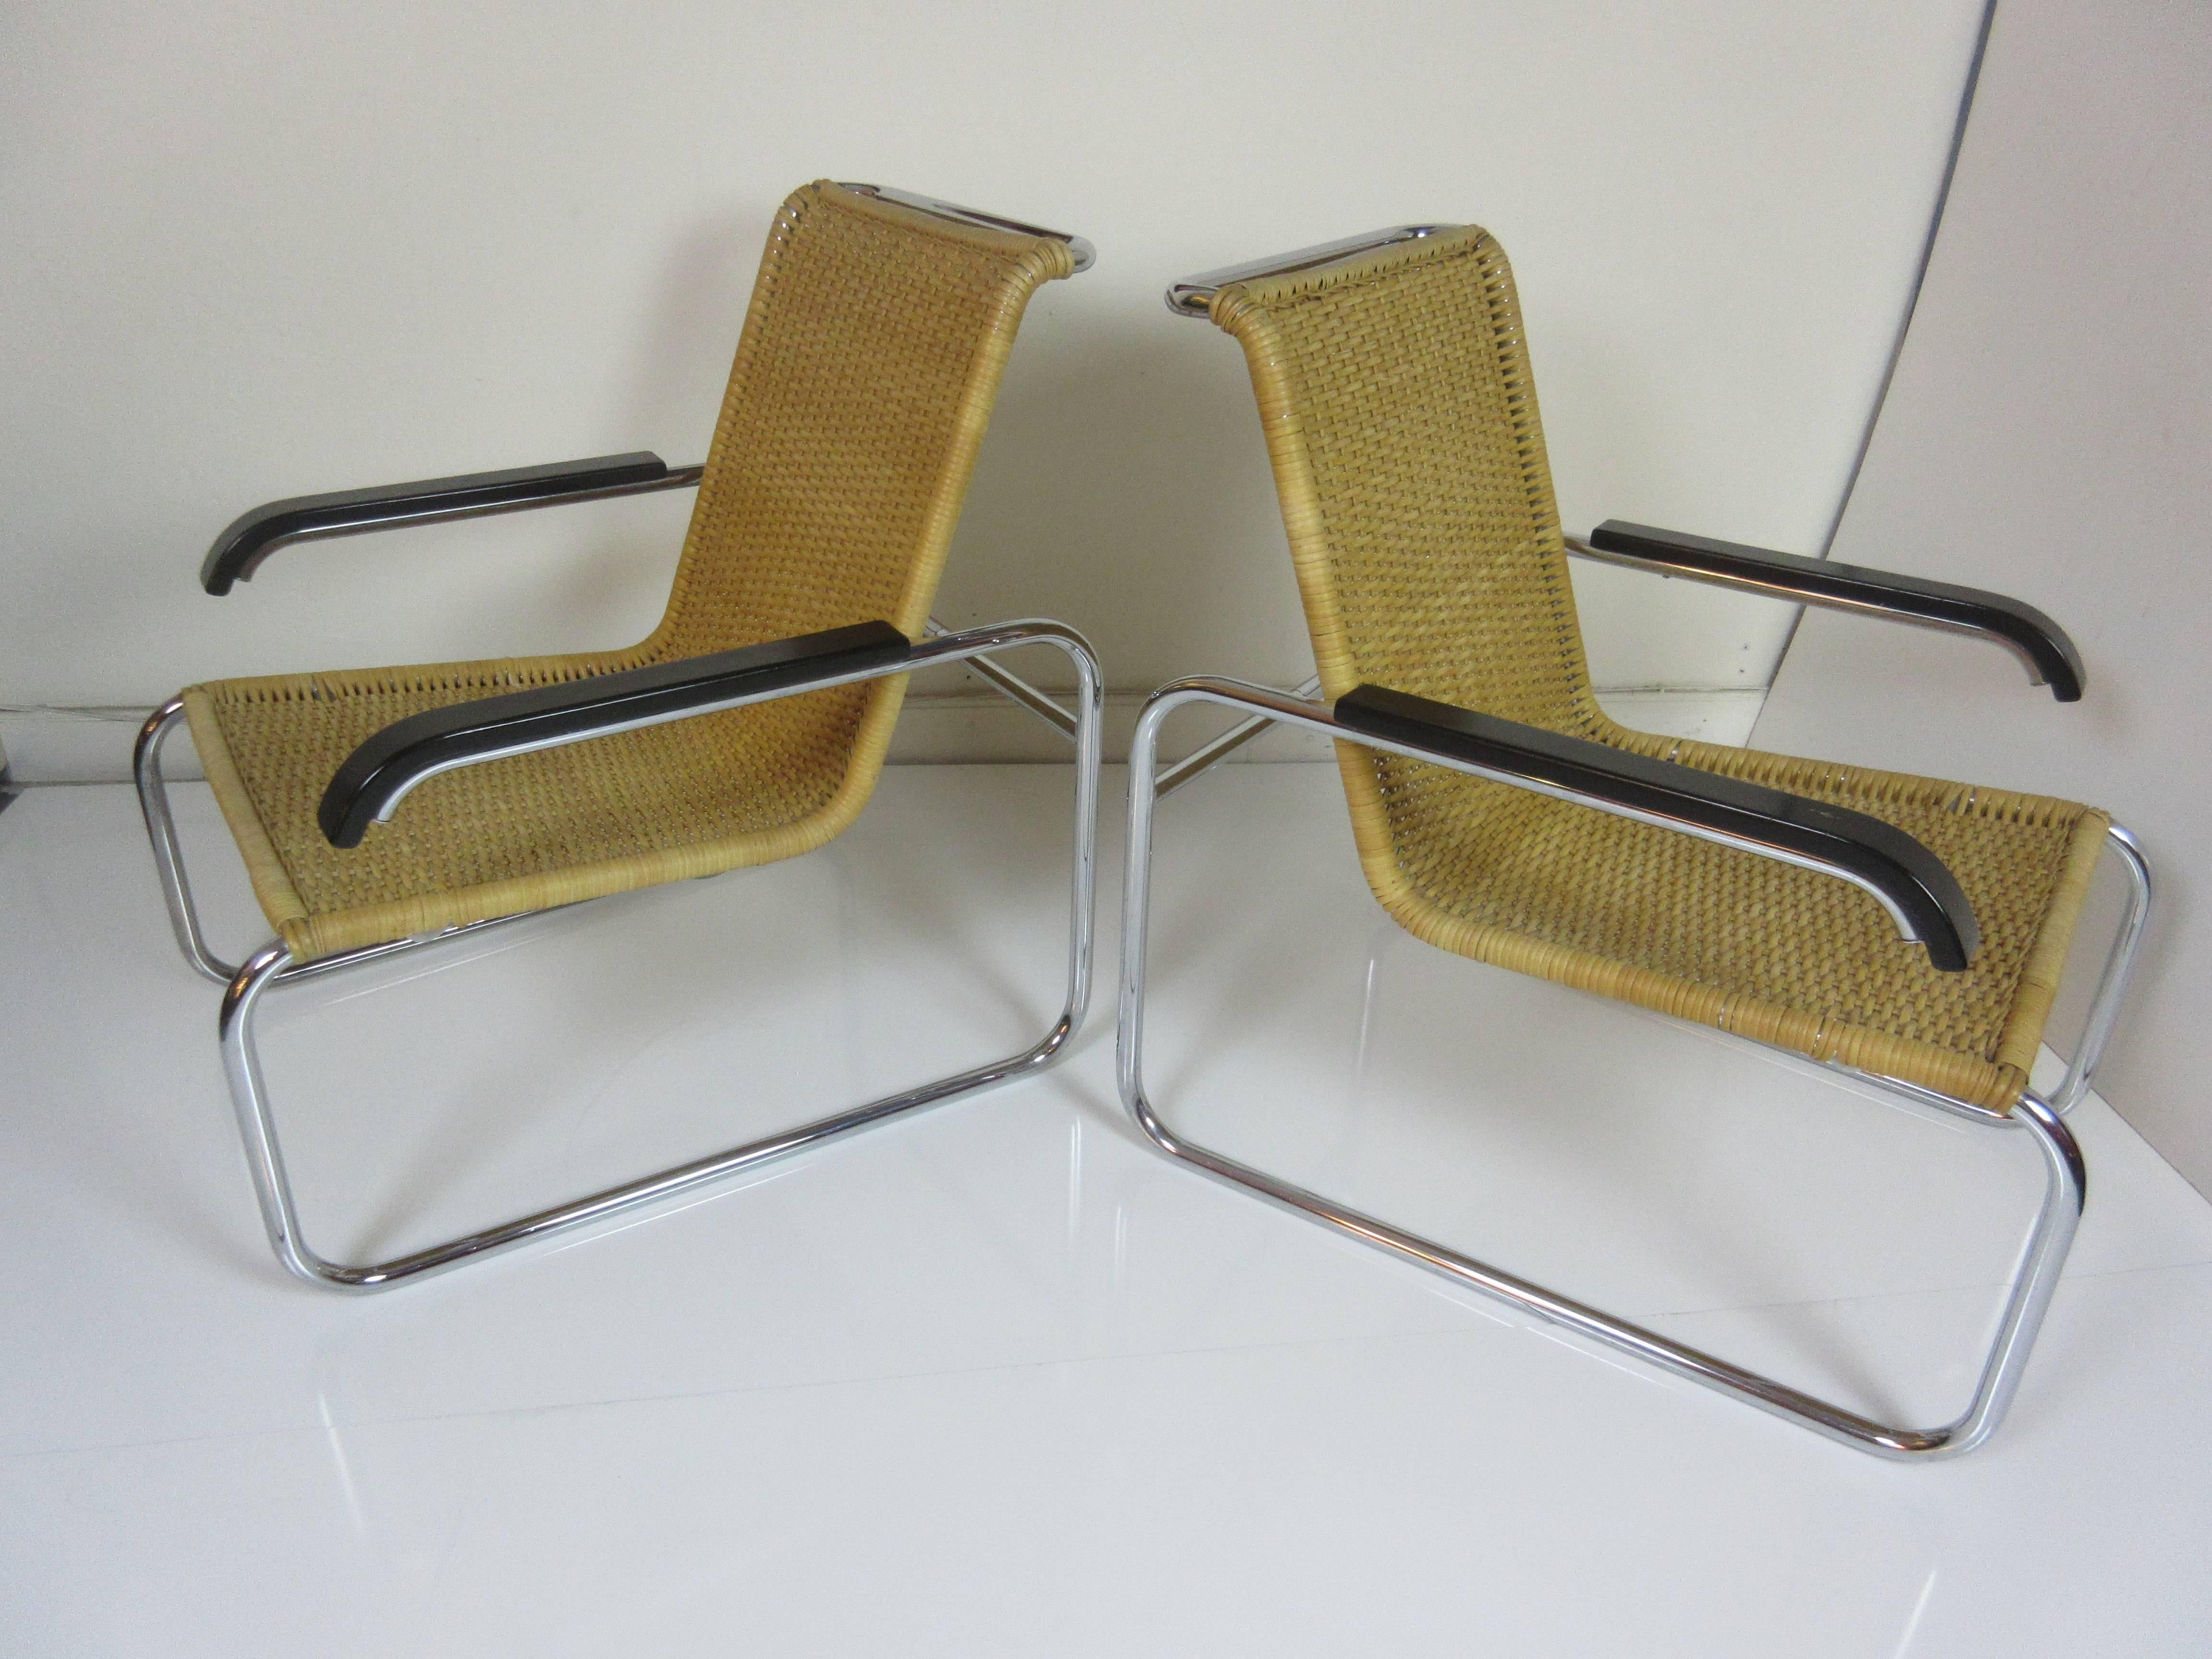 Marcel Breuer B 35 Chairs for Thonet. Designed in 1928 this pair is from the 1980s. The chrome and wicker is in exceptional condition. The black painted arms show very minimal wear in the edges. The cantilevered design allow a gentle spring motion